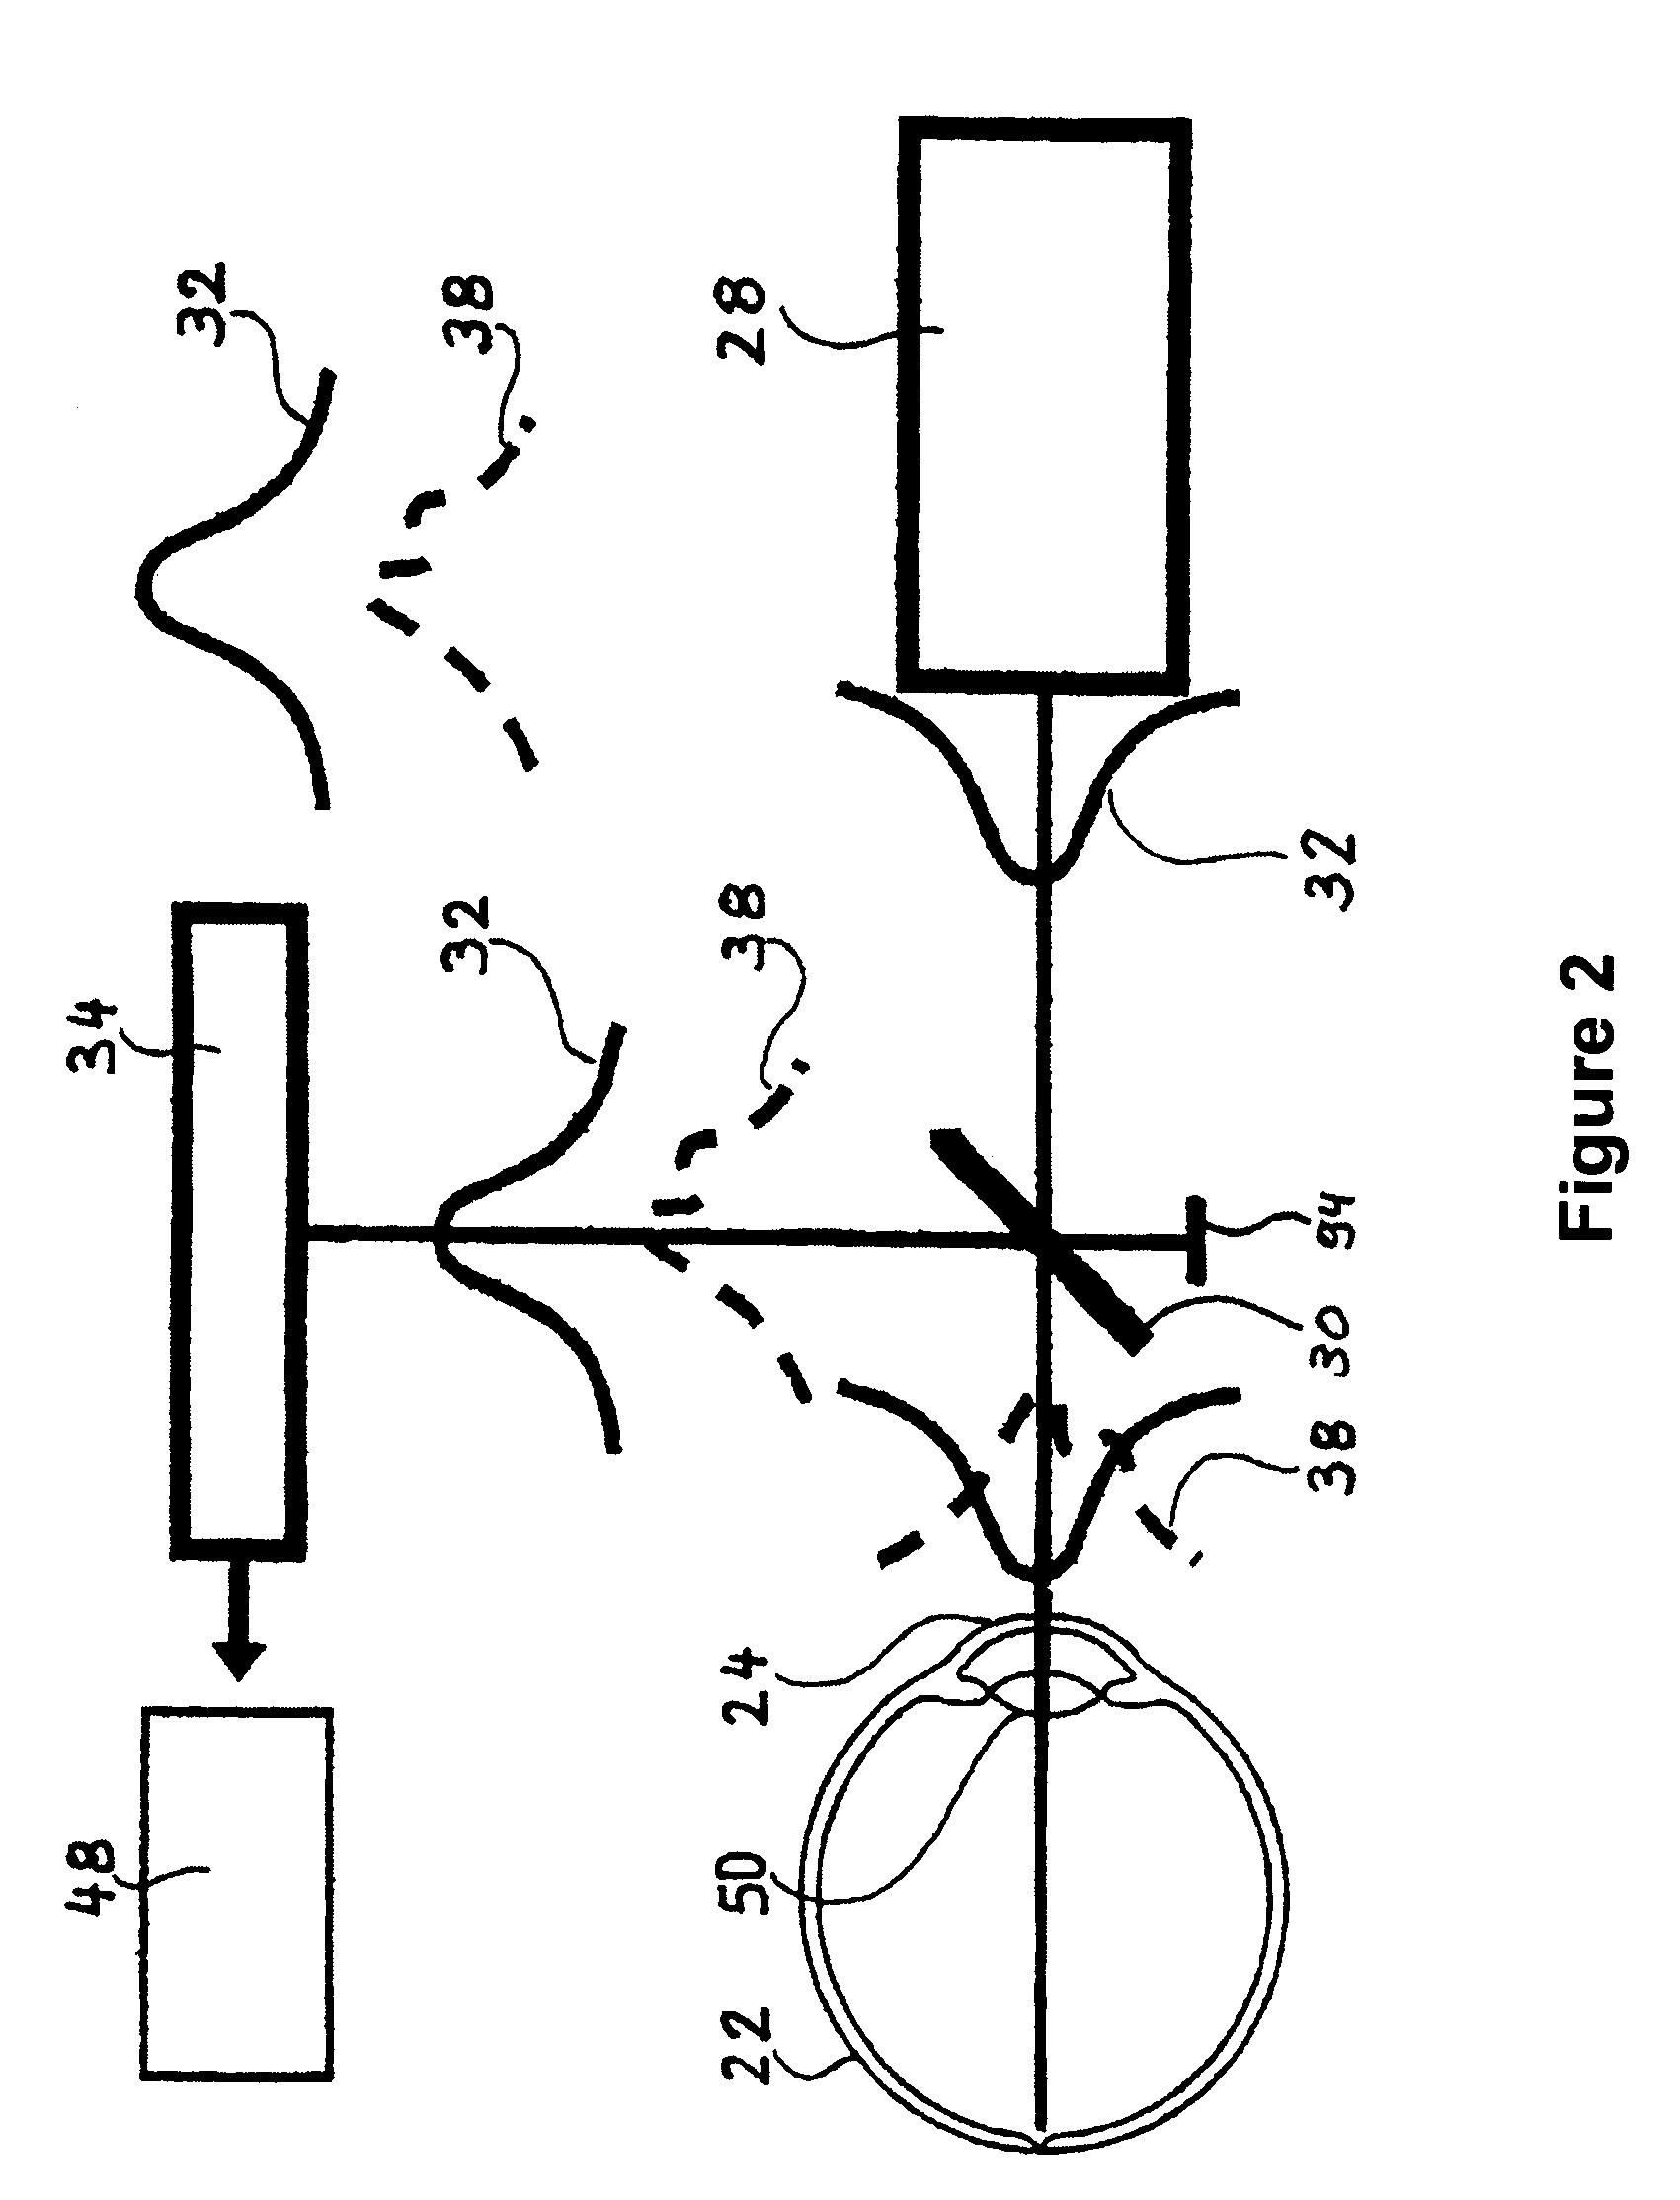 Method and an apparatus for the simultaneous determination of surface topometry and biometry of the eye